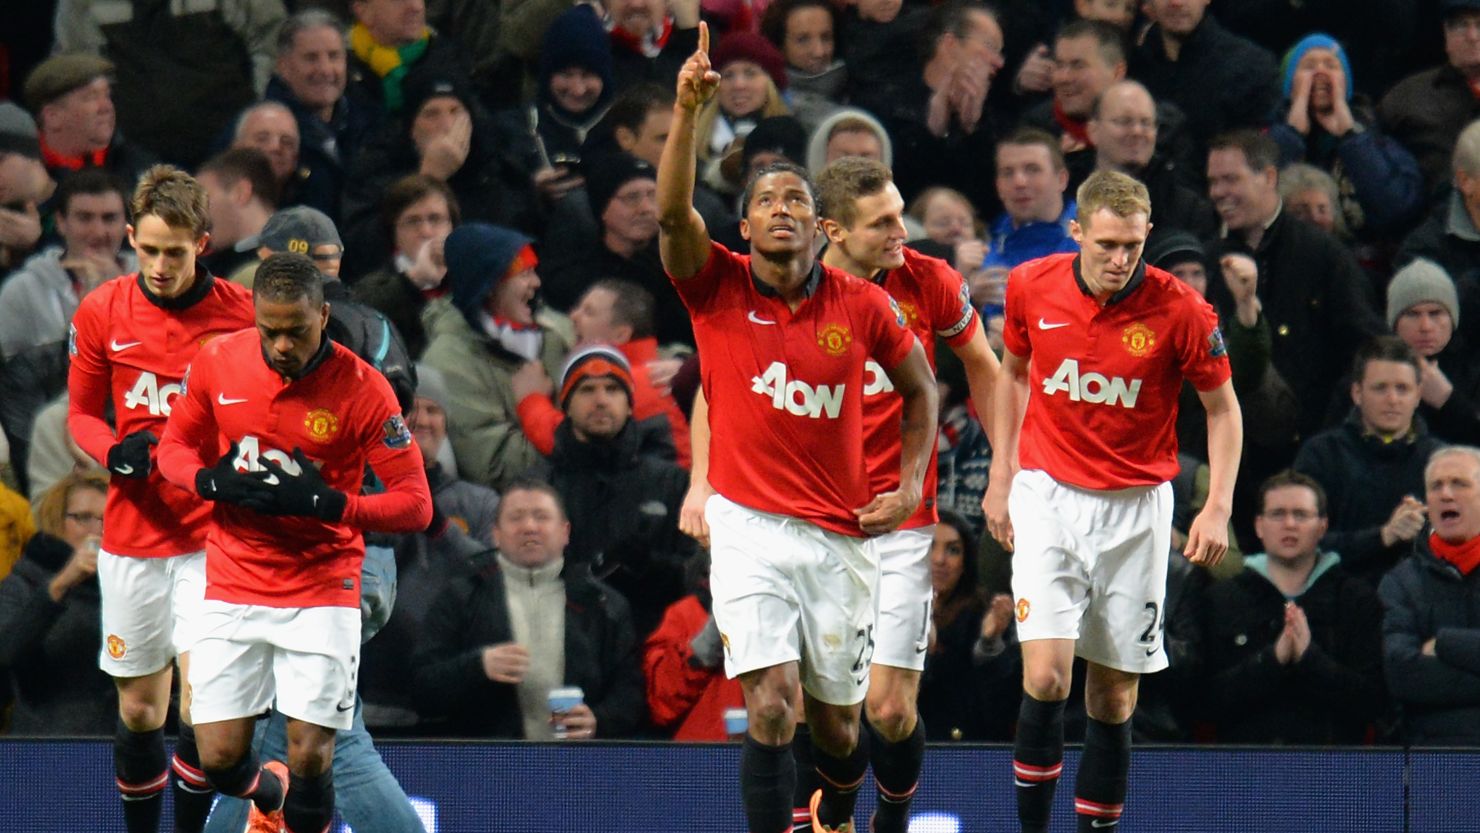 Antonio Valencia points to the heavens after scoring Manchester United's opening goal against Swansea City on Saturday.